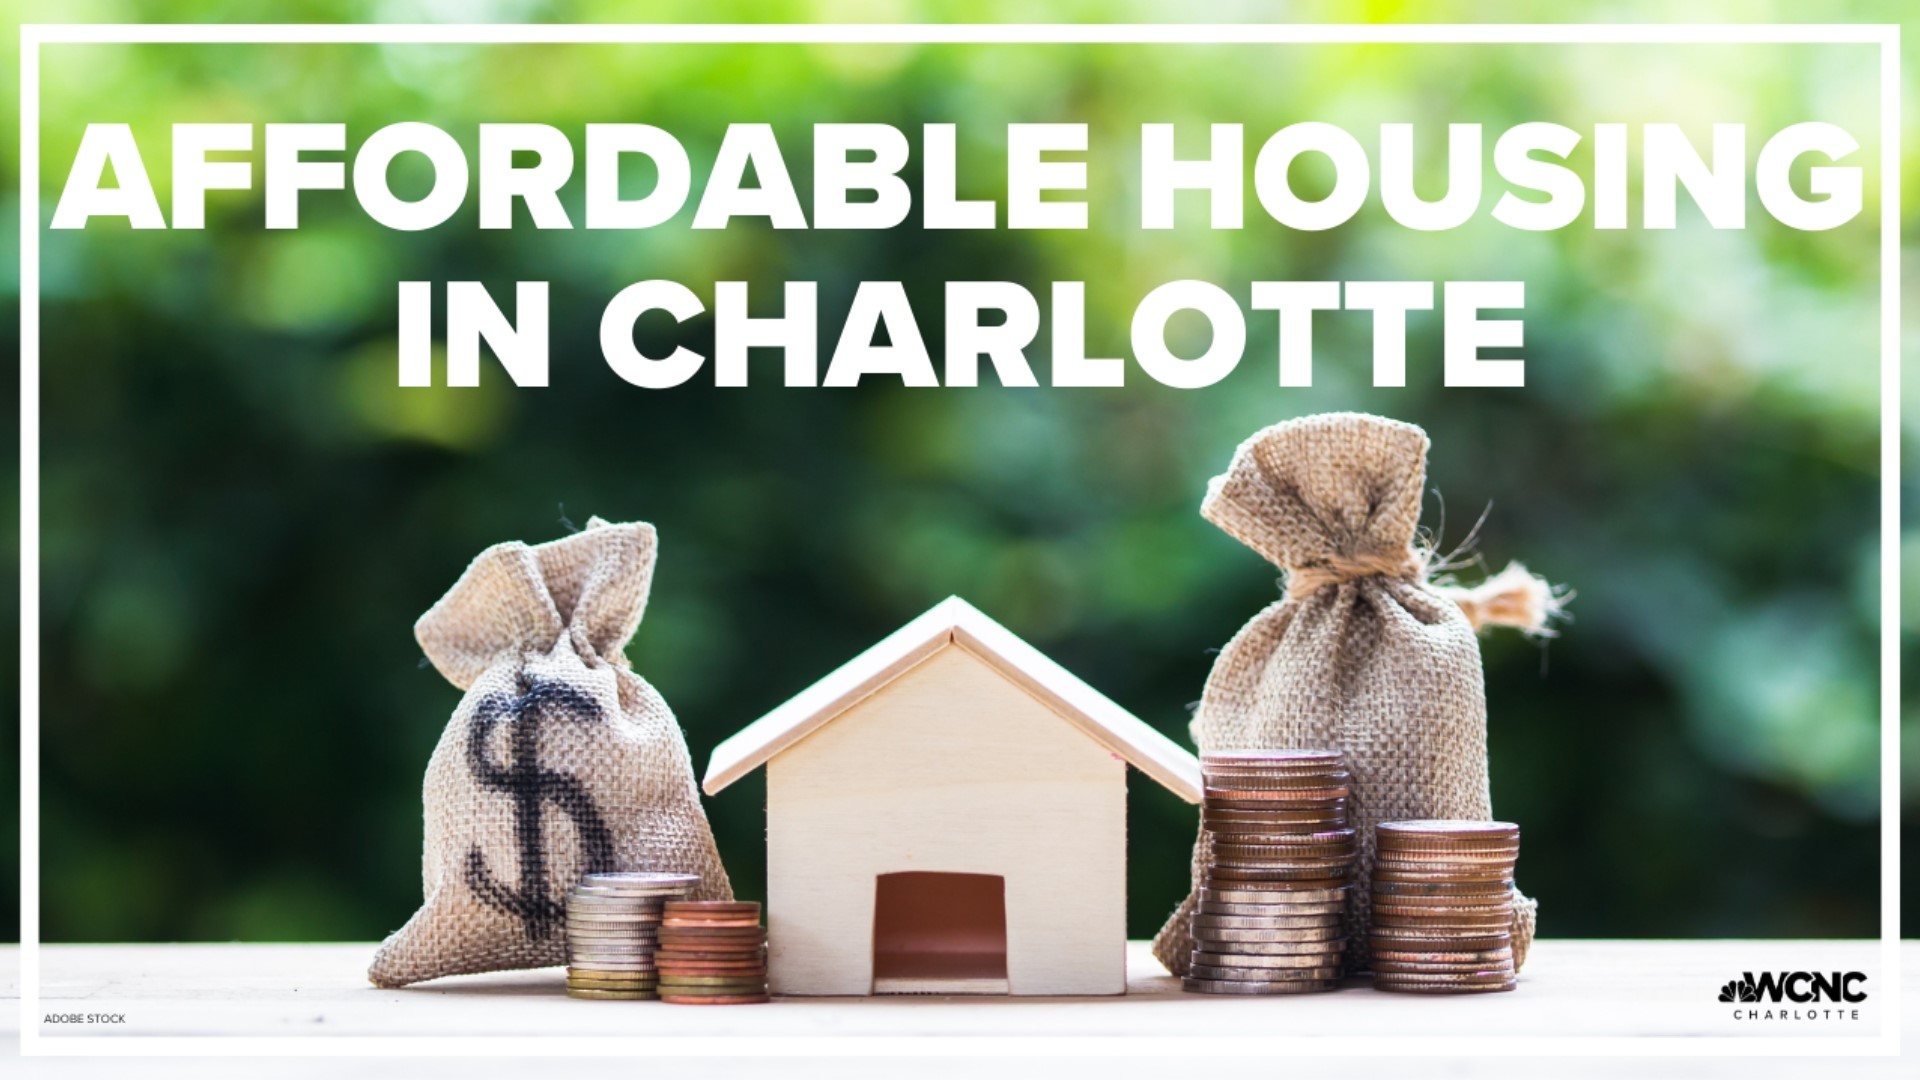 New affordable housing is coming to Charlotte's Grier Heights neighborhood.